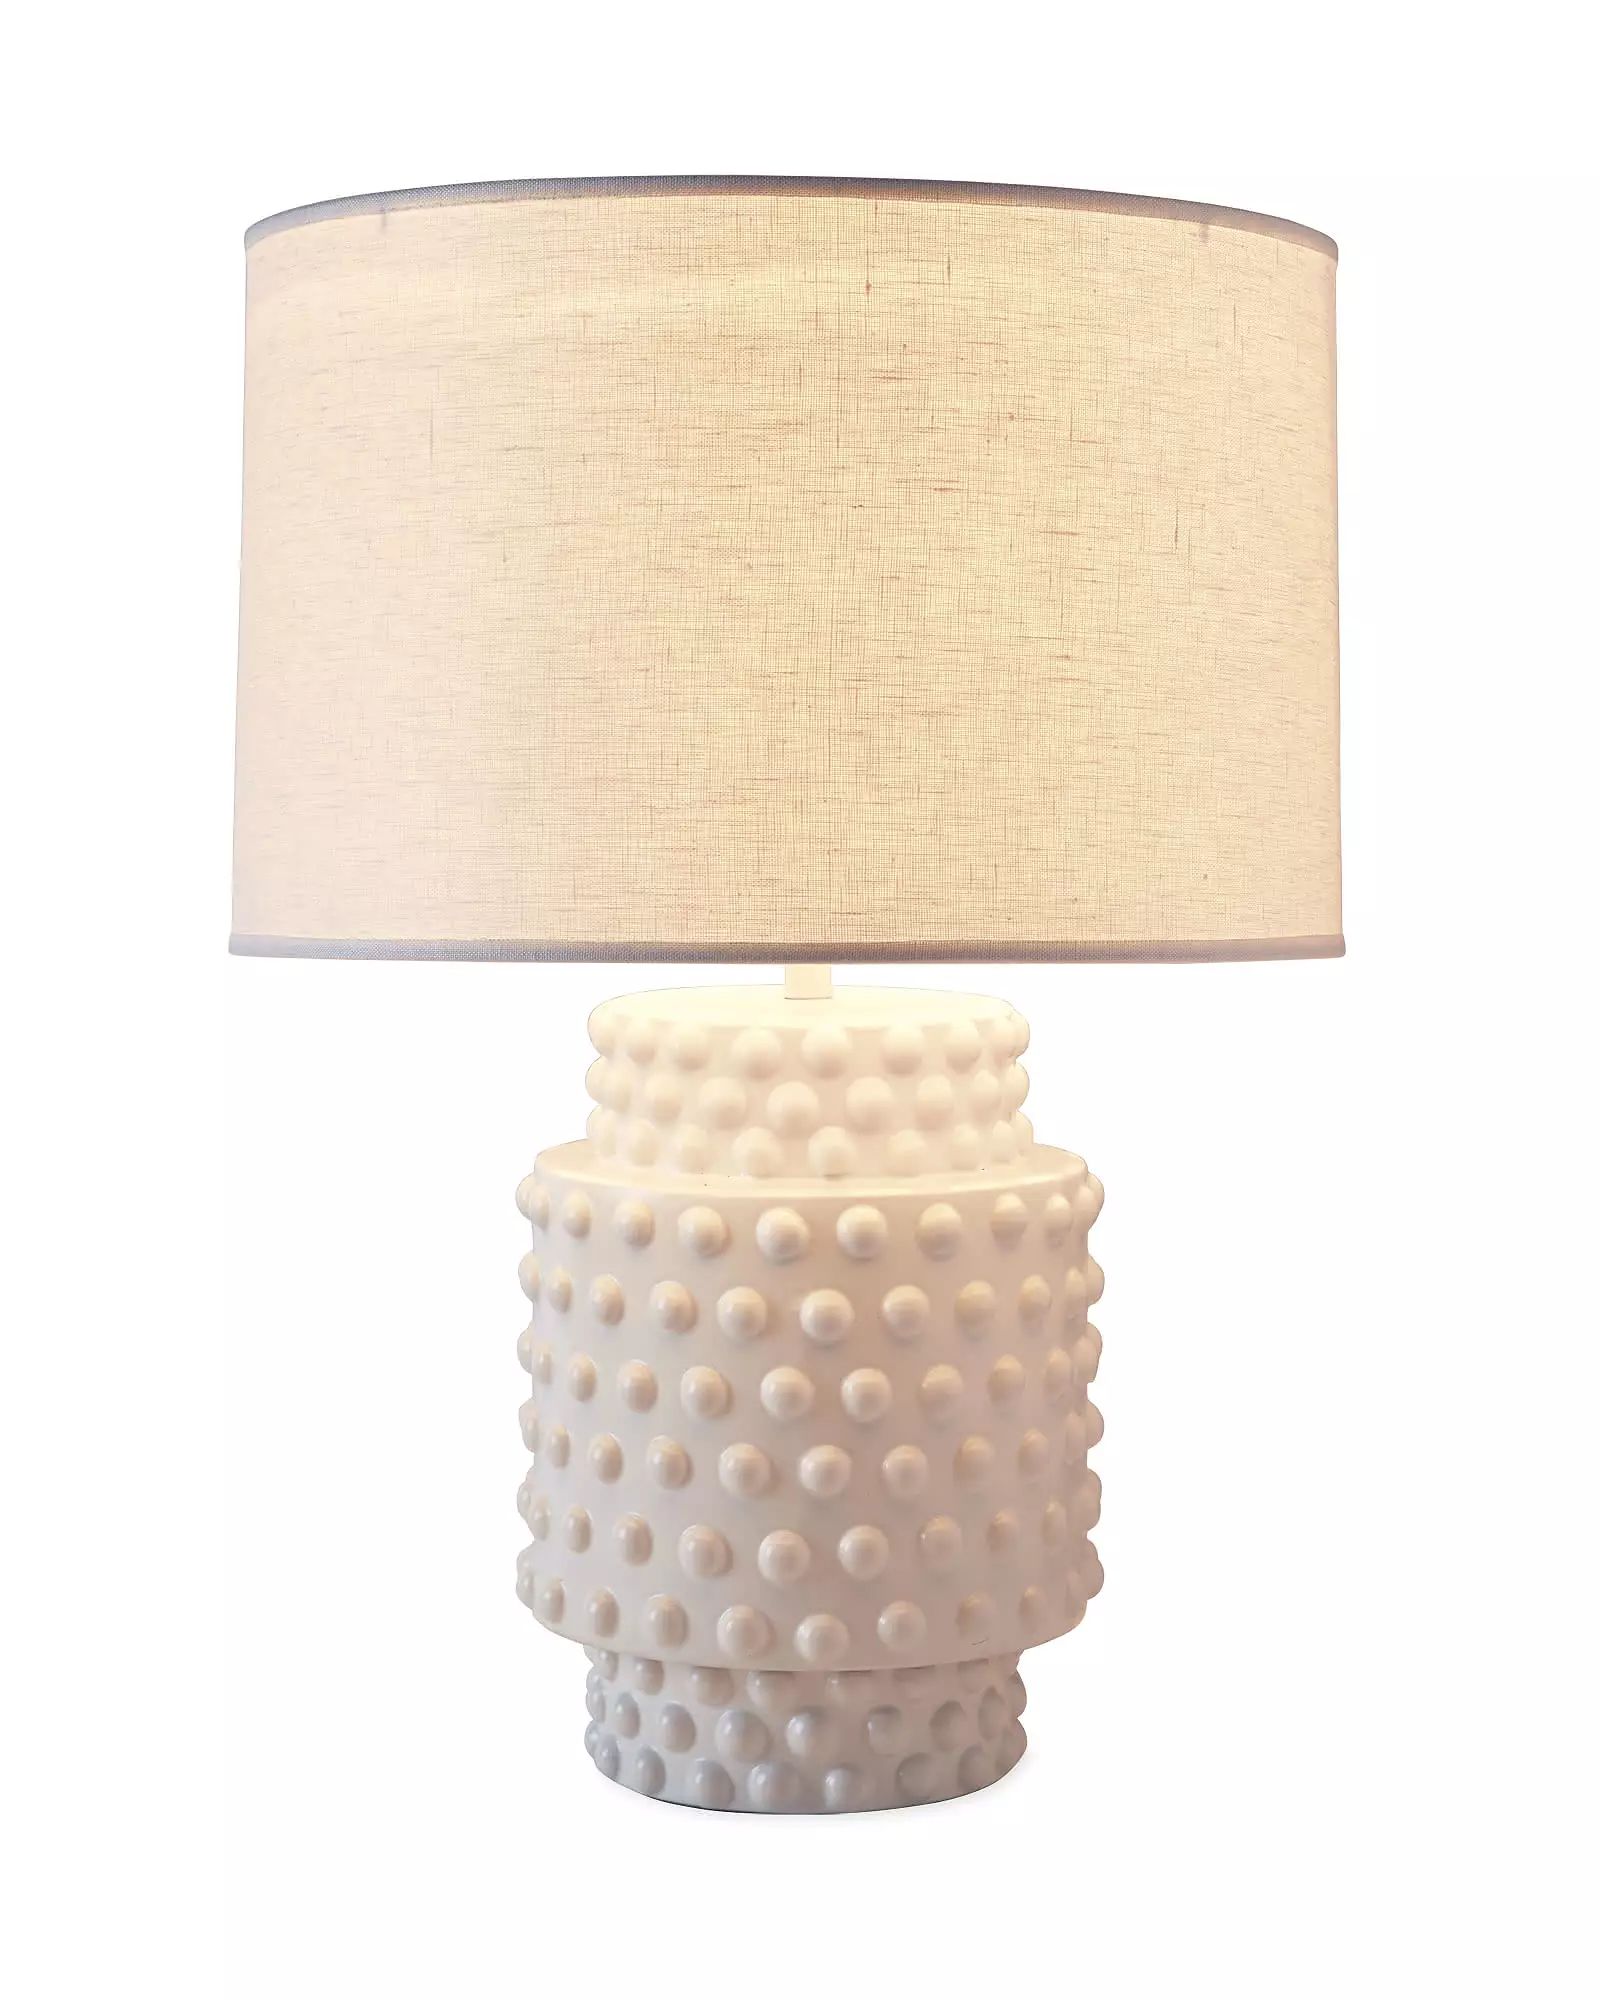 Tinsley Table Lamp | Serena and Lily